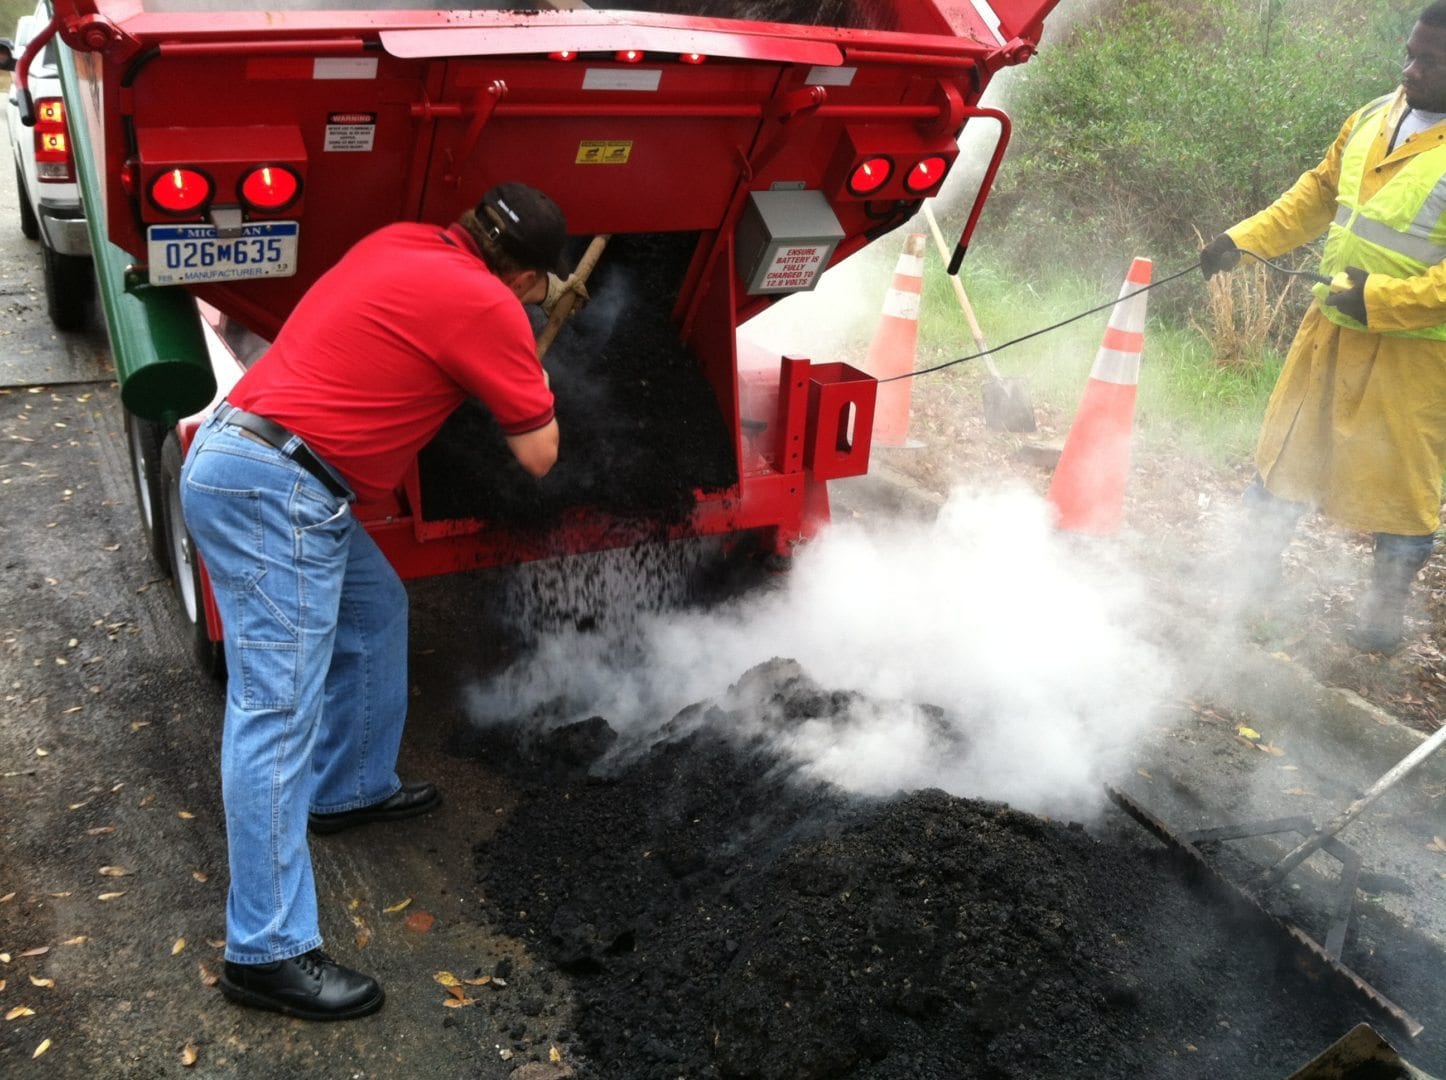 A worker shoveling hot mix asphalt from a hot box into a pothole for repair.